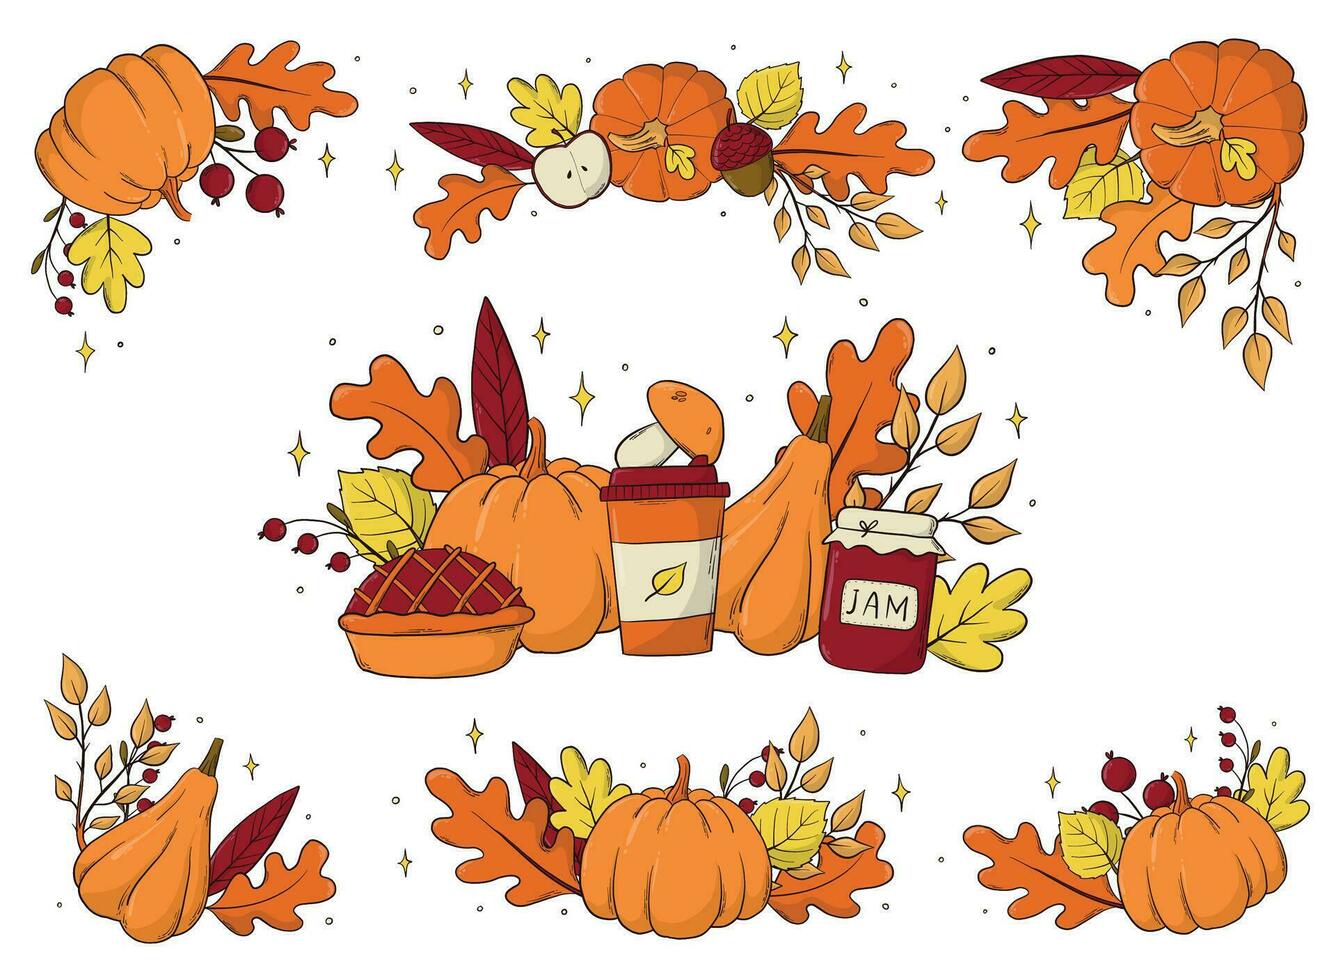 set of autumn compositions, stickers decorated with doodles of leaves and pumpkins. Good for prints, sublimation, planners, signs, cards, banners, signs, posters, etc. EPS 10 vector